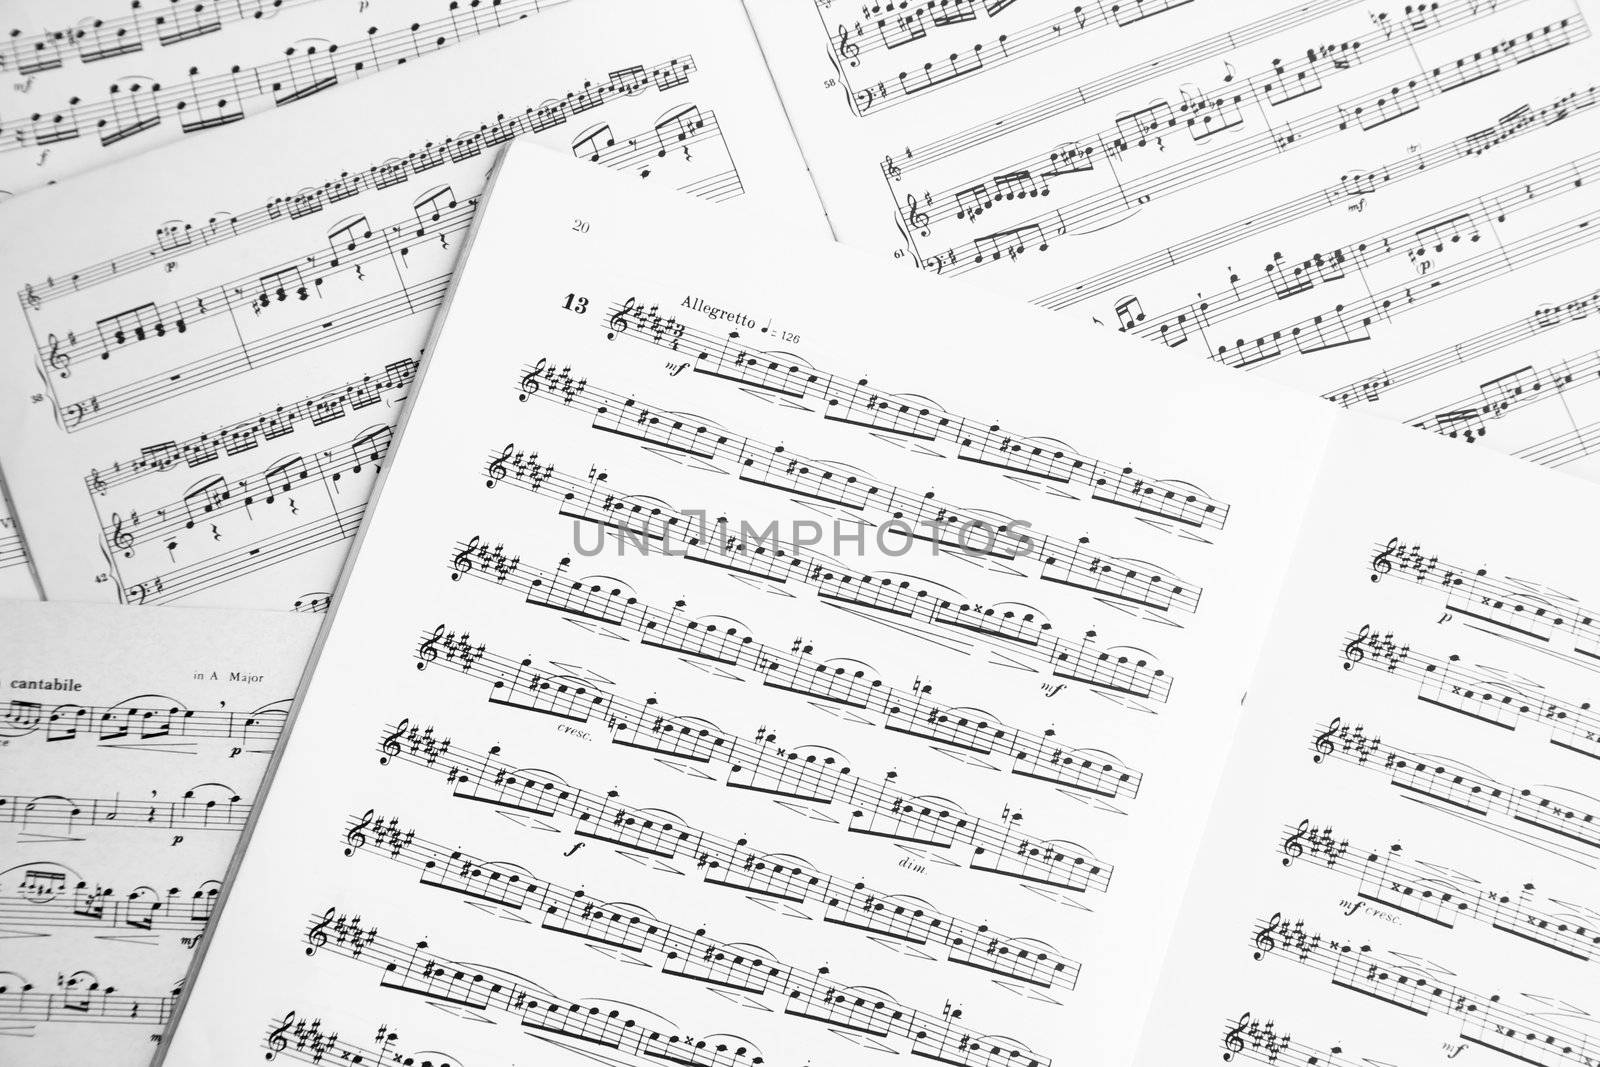 Shot of scattered clasic music sheets